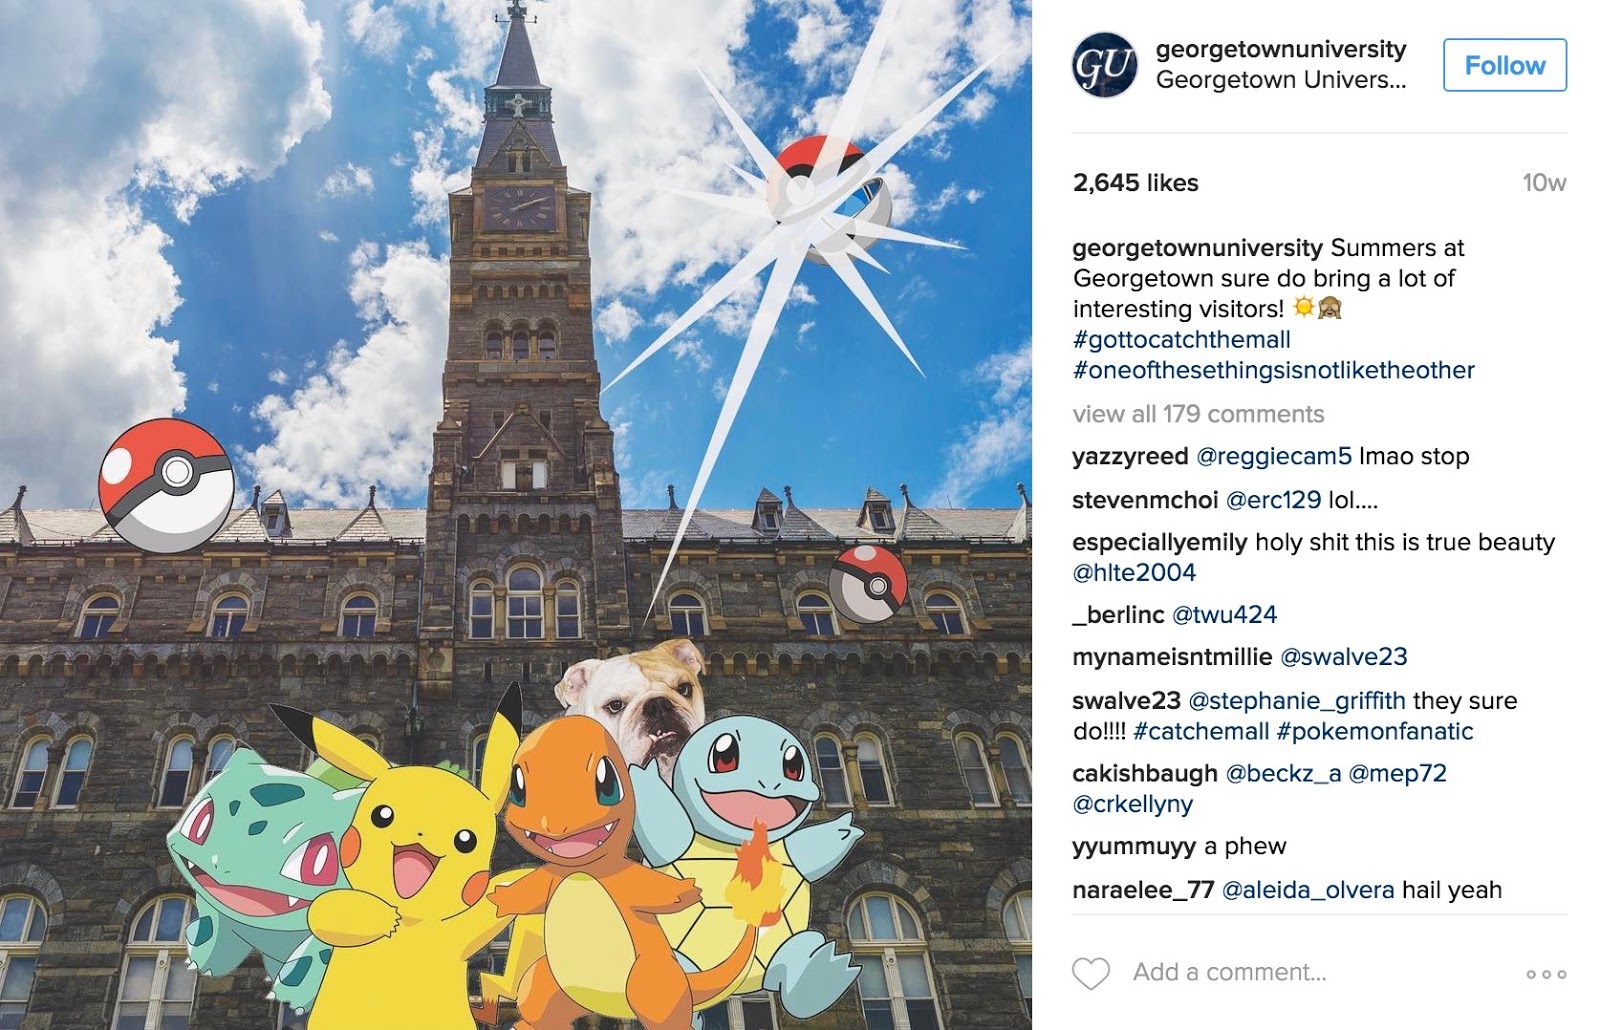 Georgetown uses humor in its social content